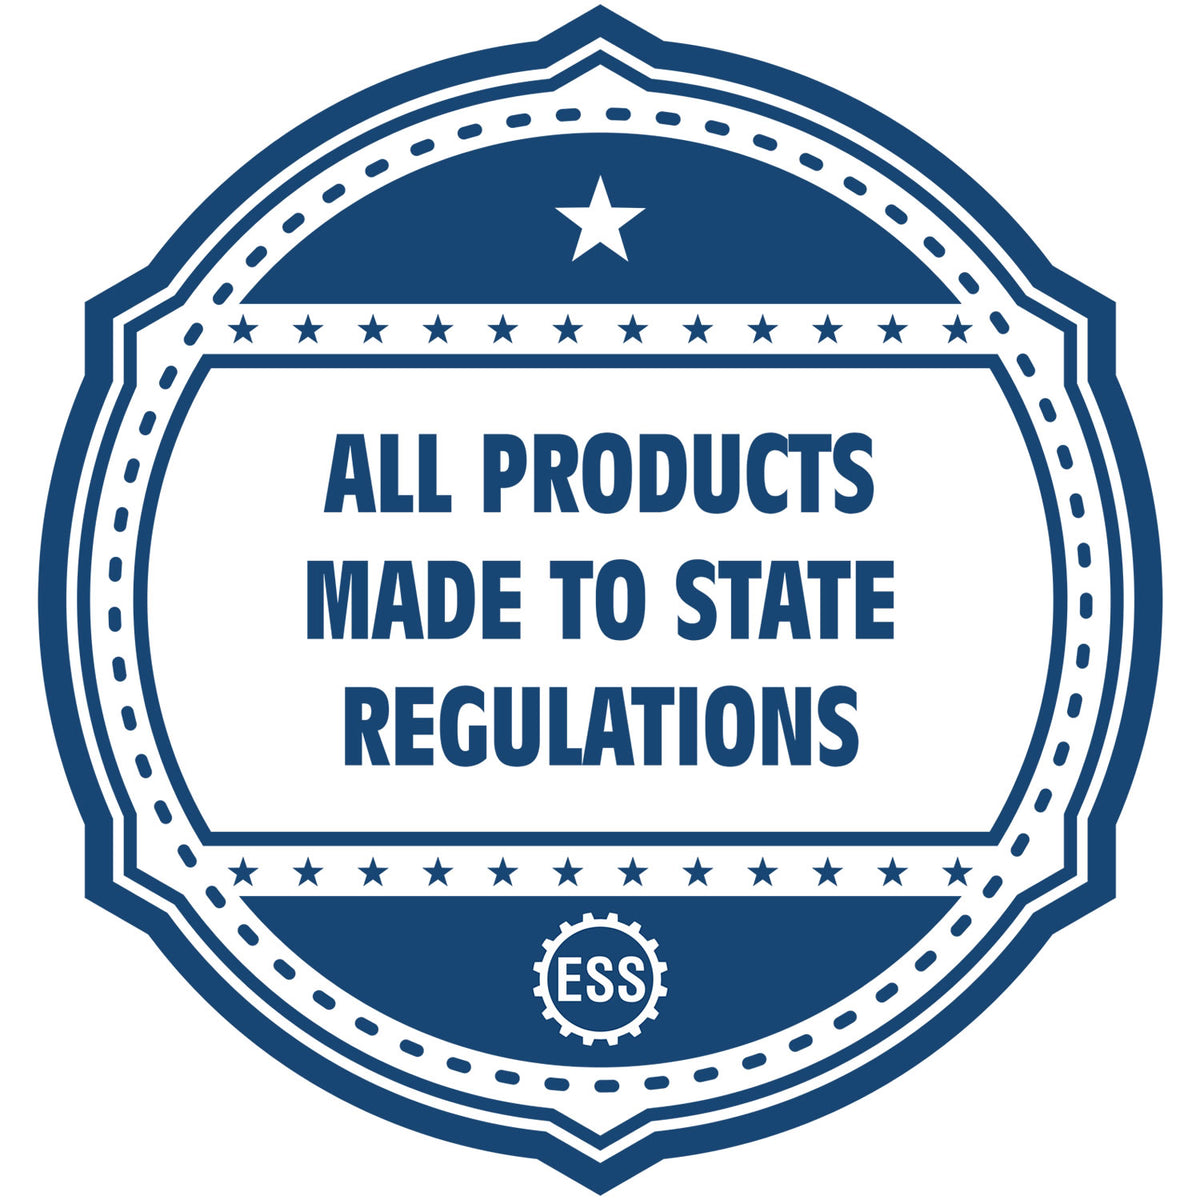 An icon or badge element for the Handheld New Jersey Professional Engineer Embosser showing that this product is made in compliance with state regulations.